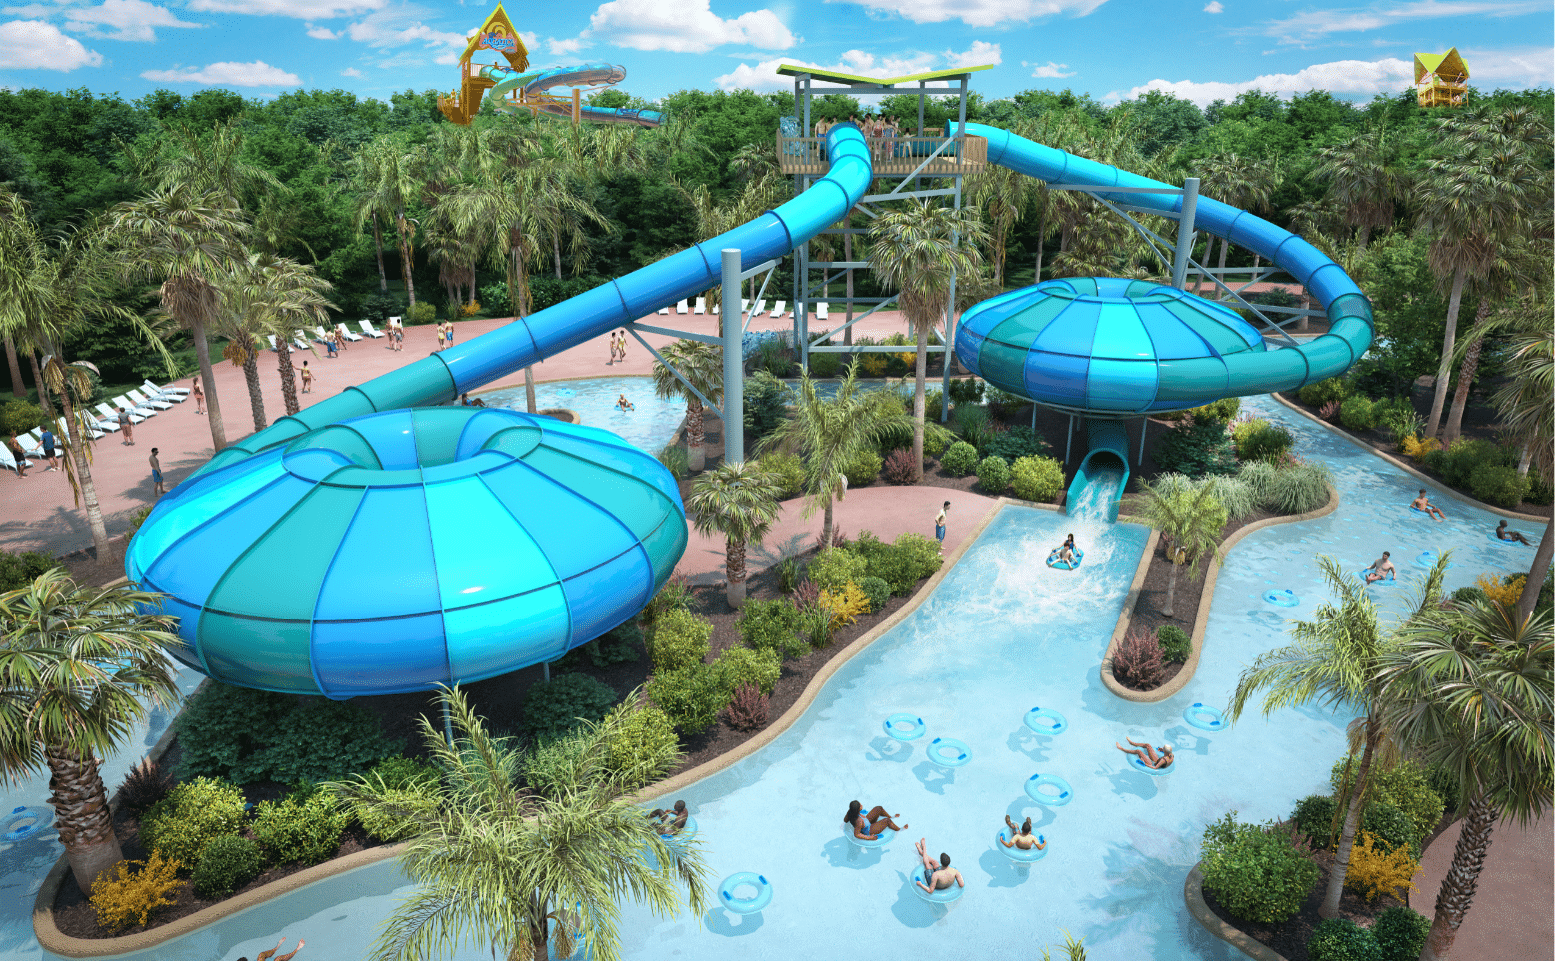 A Digitally Immersive Waterslide Experience is Coming to Orlando at this Favorite Water Park